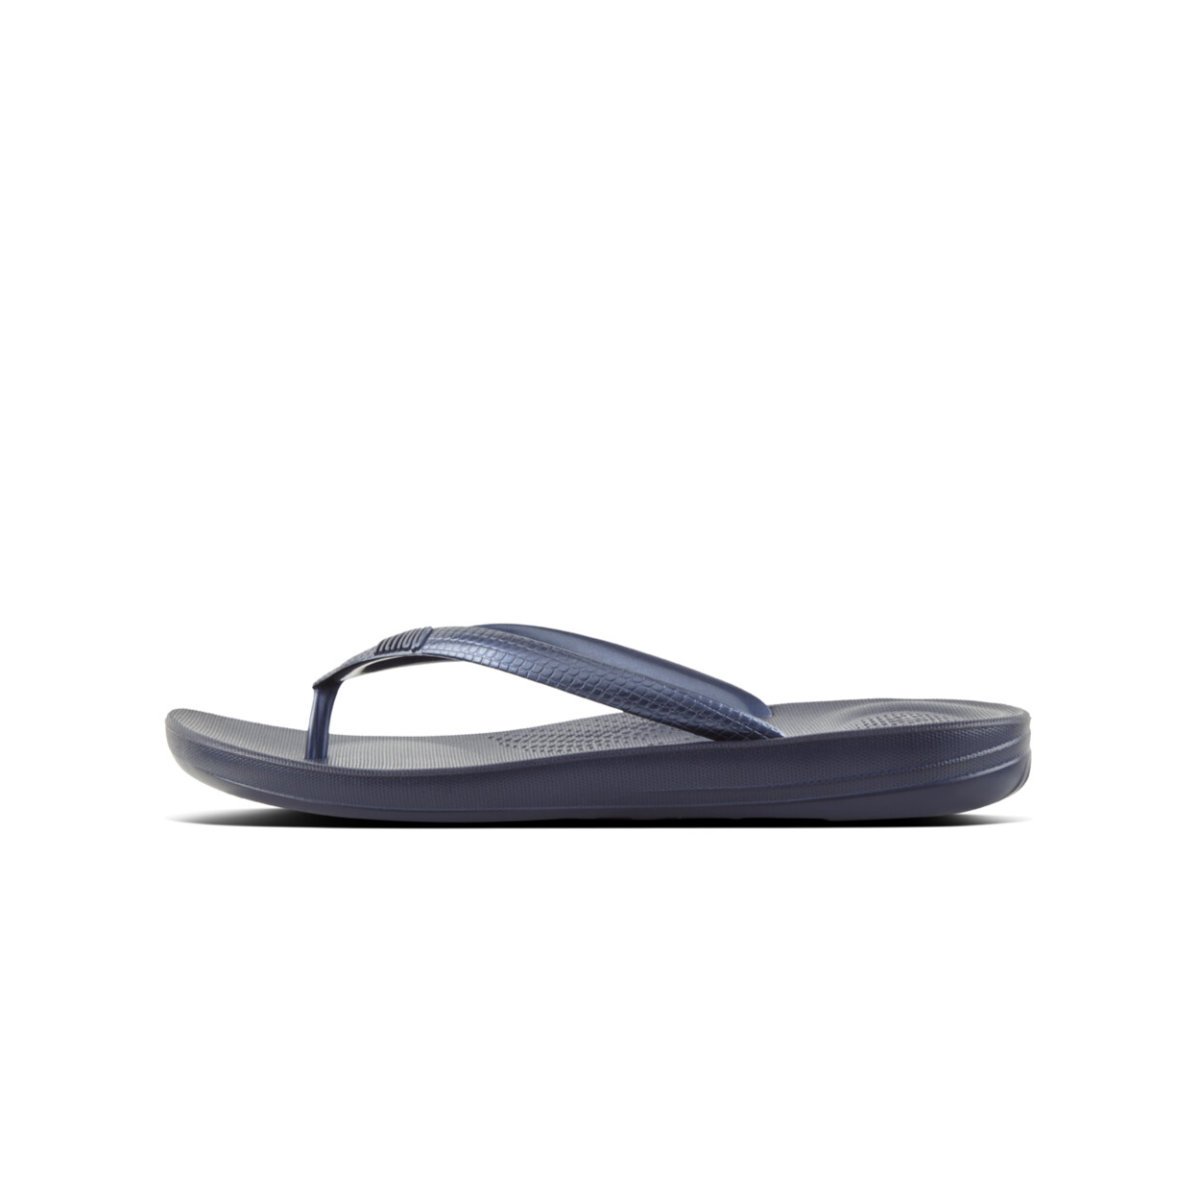 FitFlop iQUSHION Ergonomic Flip-Flops Midnight Navy front view